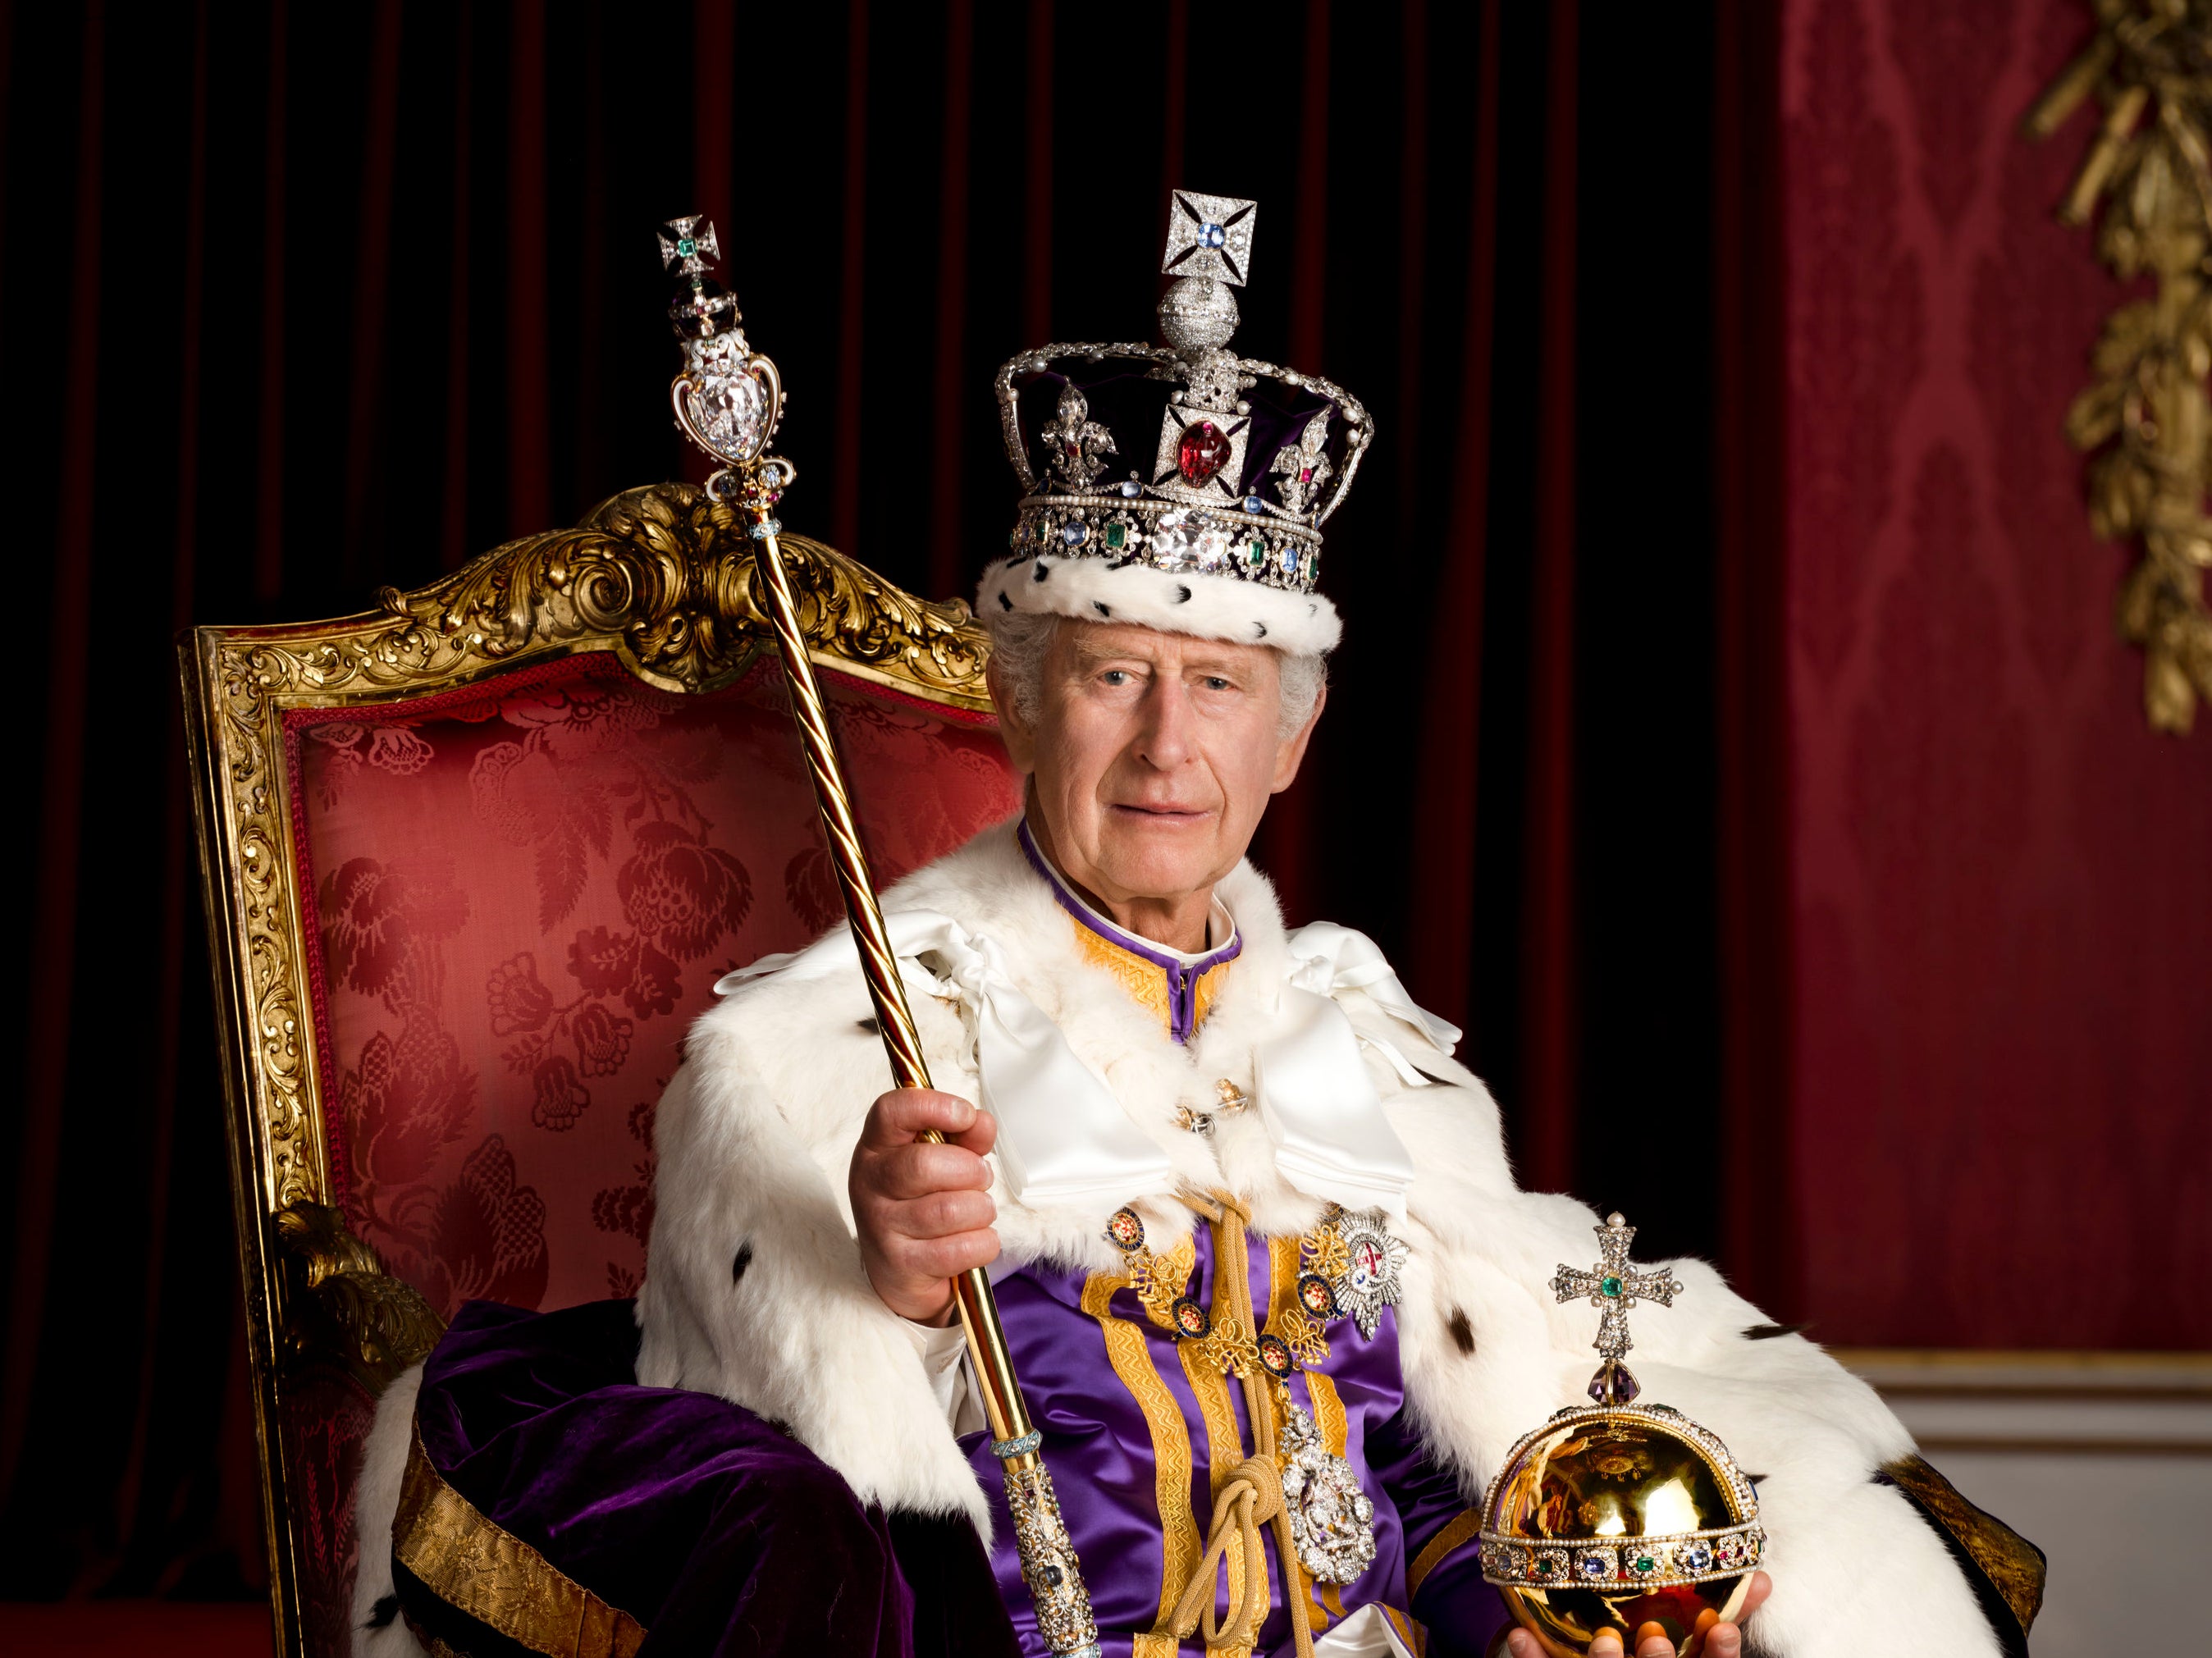 King Charles' coronation: what changes has UK seen under new